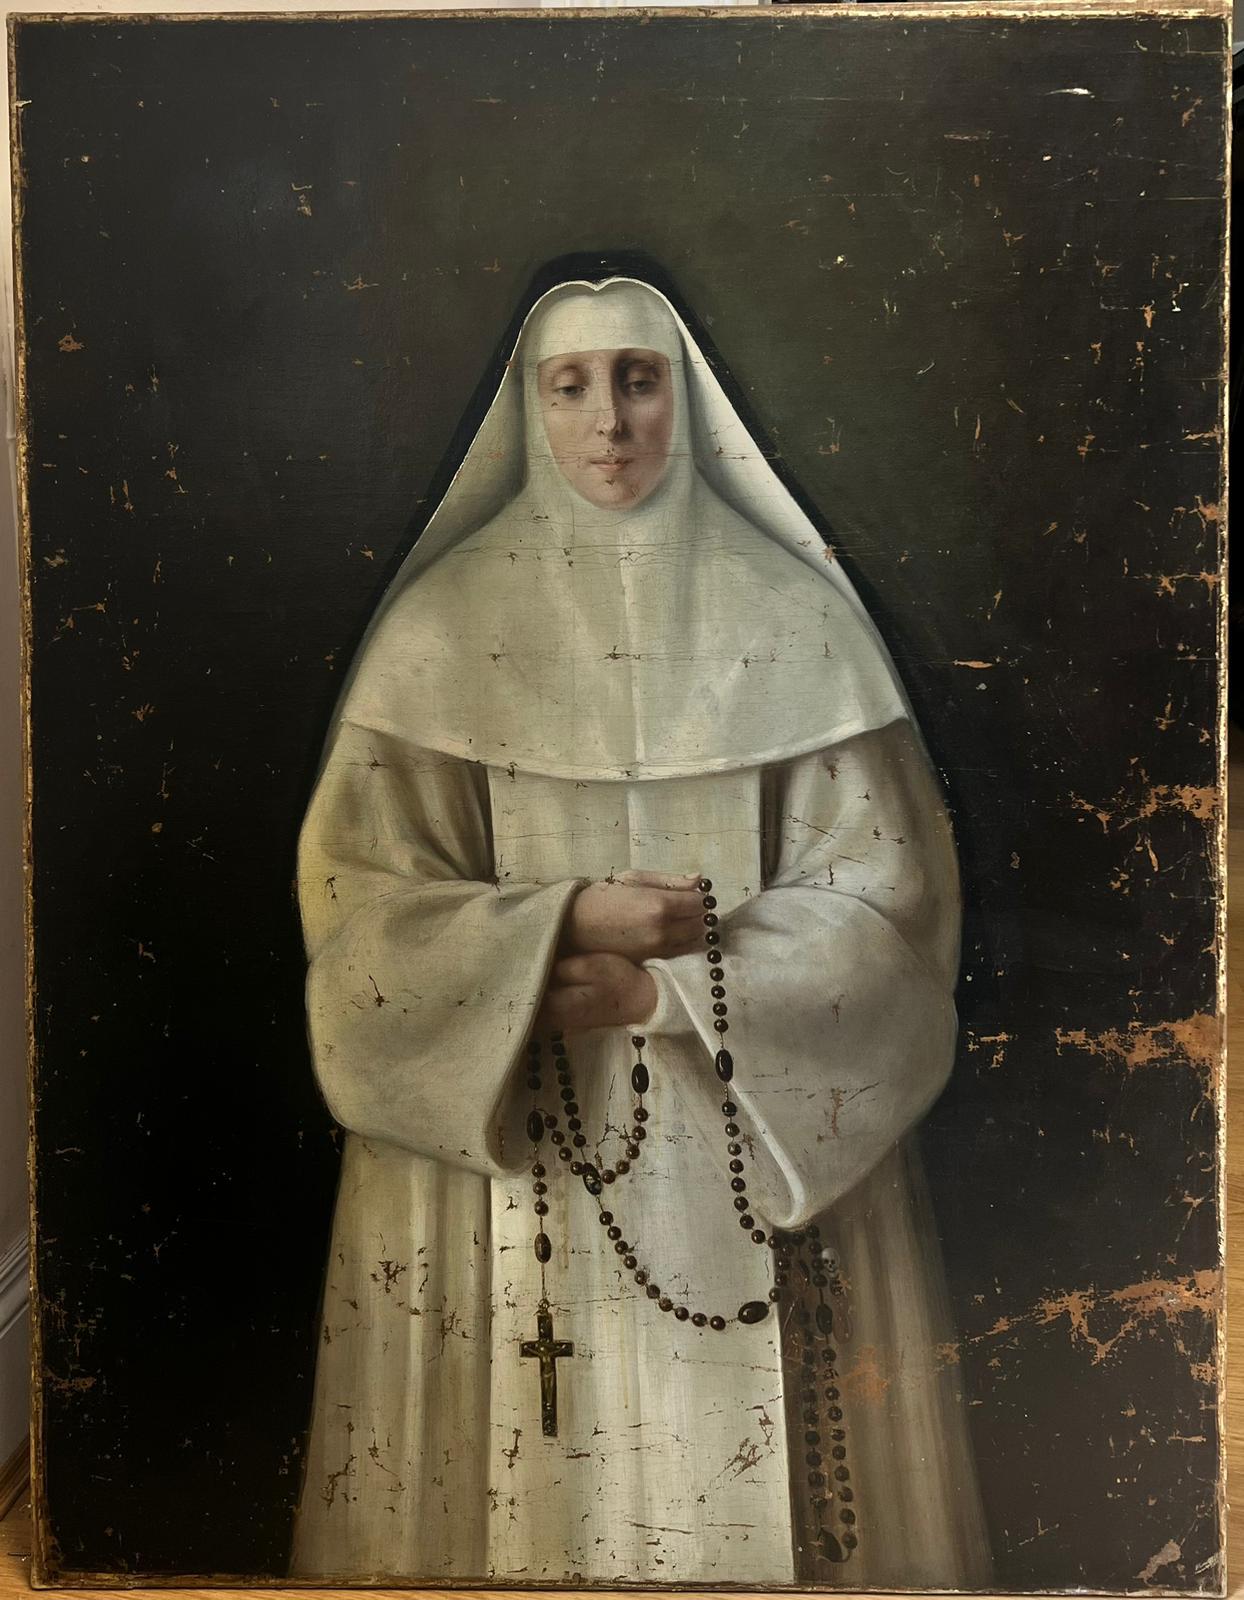 Huge 19th Century Oil Portrait of a French Nun from a collection in Versailles - Painting by French School